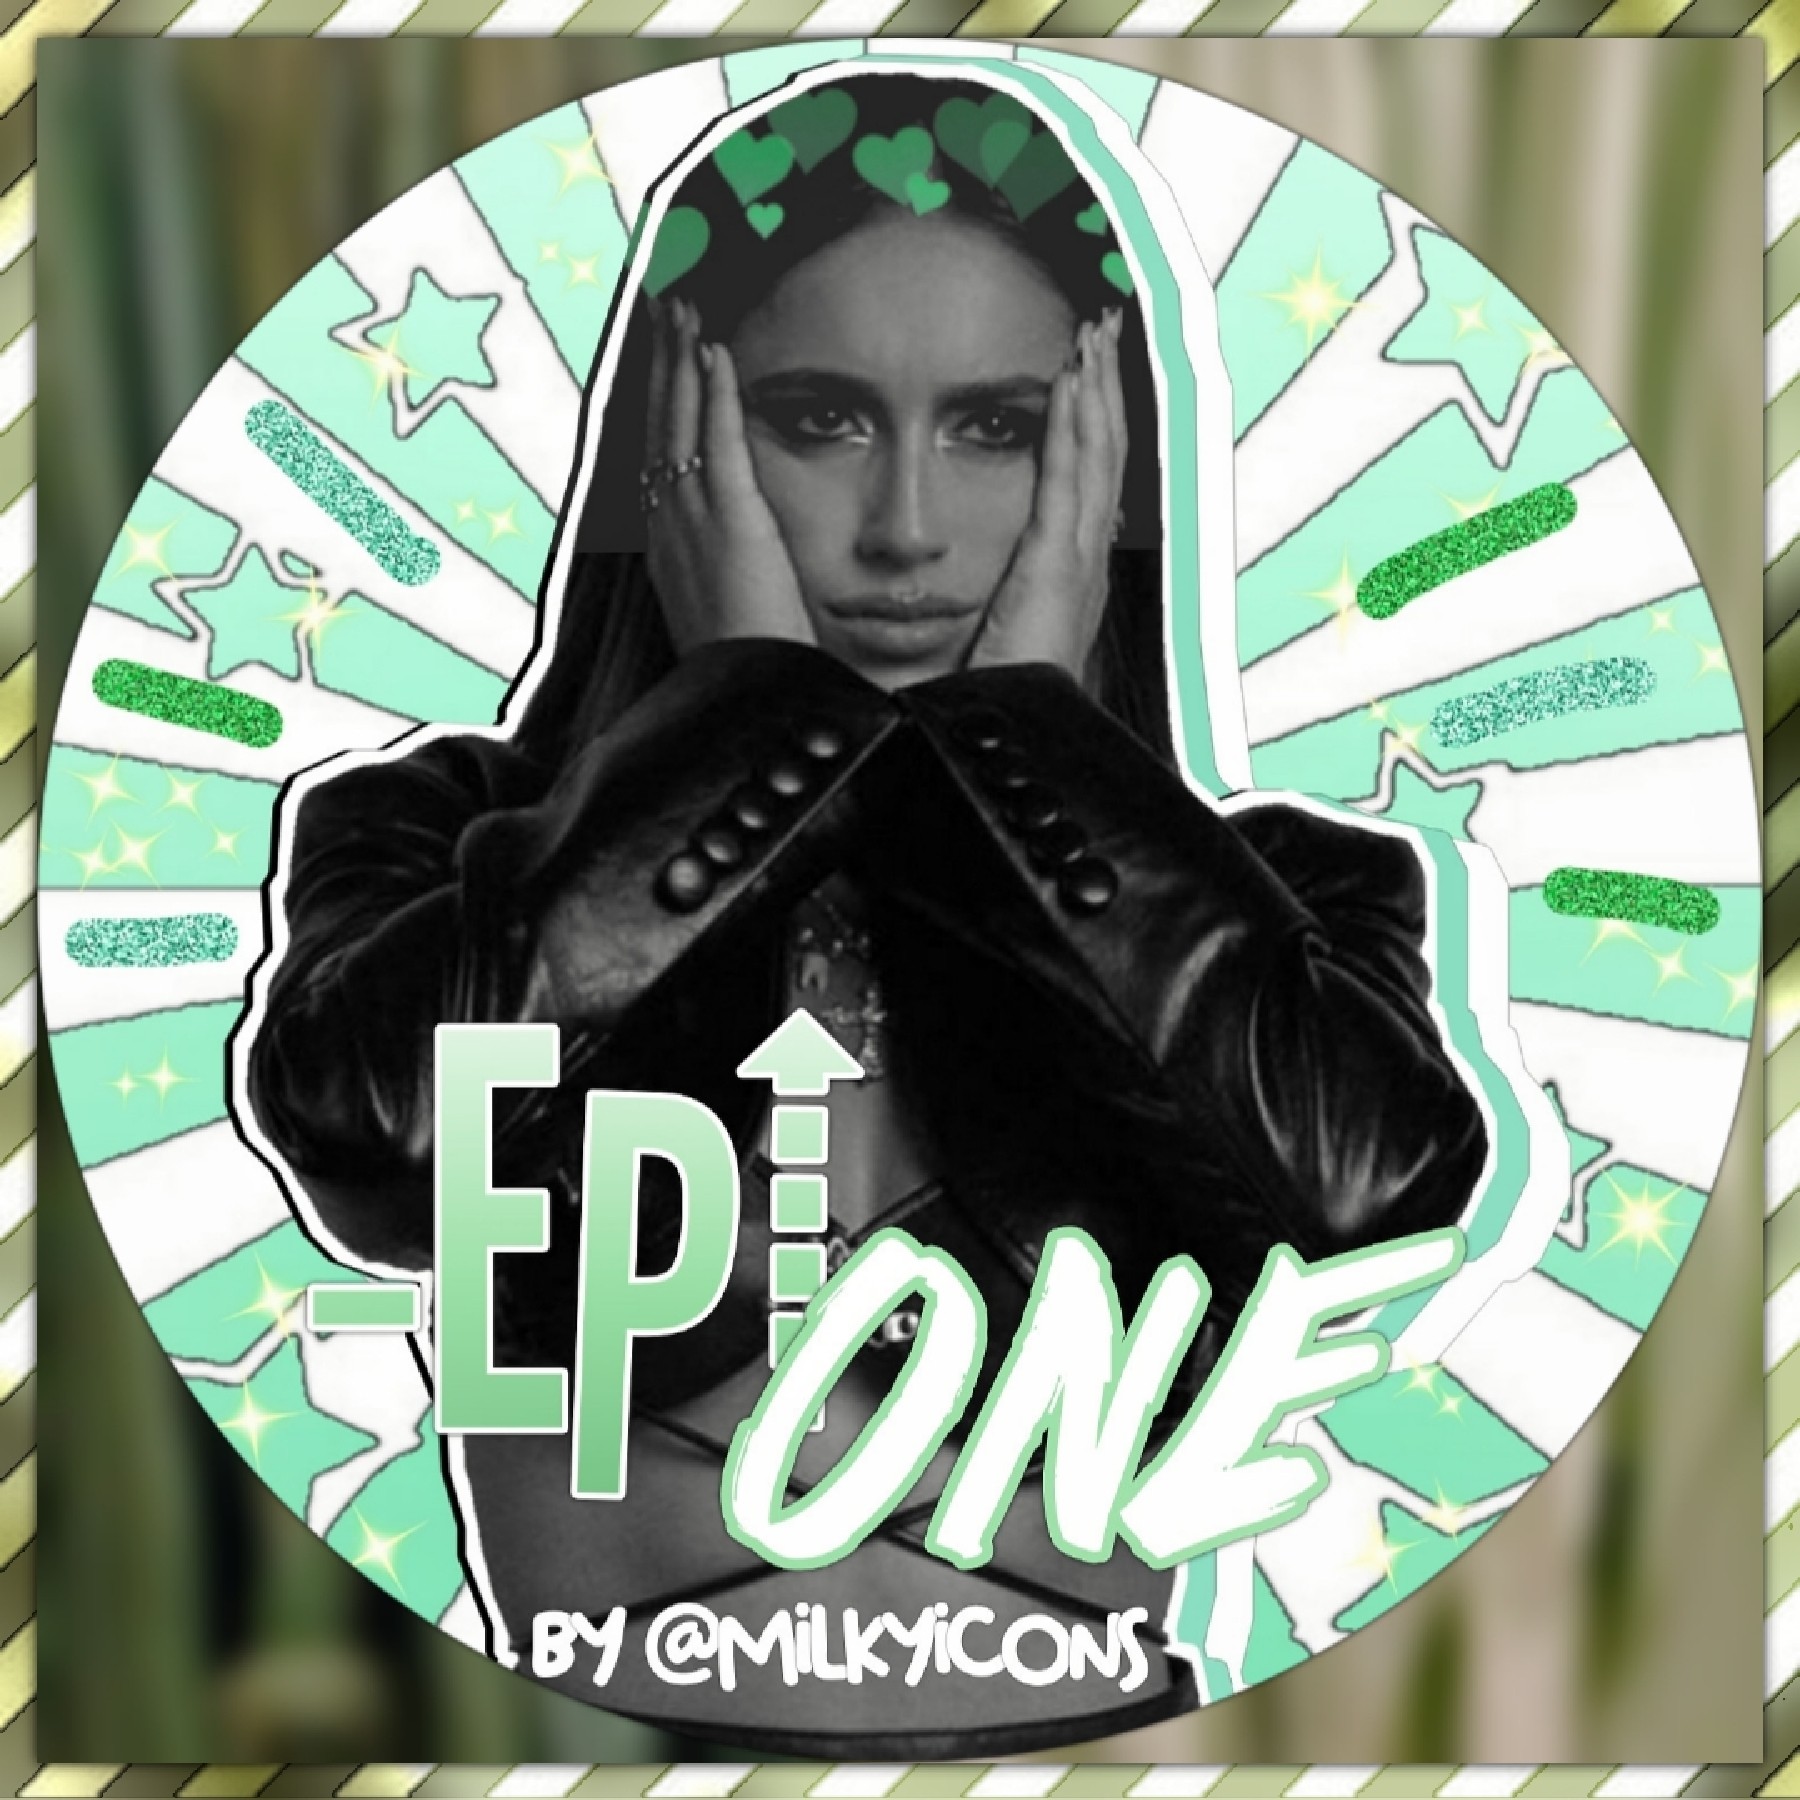 icon for: @-epione💚
style: simple
color: green🌱
hope you like it!😊pls give credits if used 💗